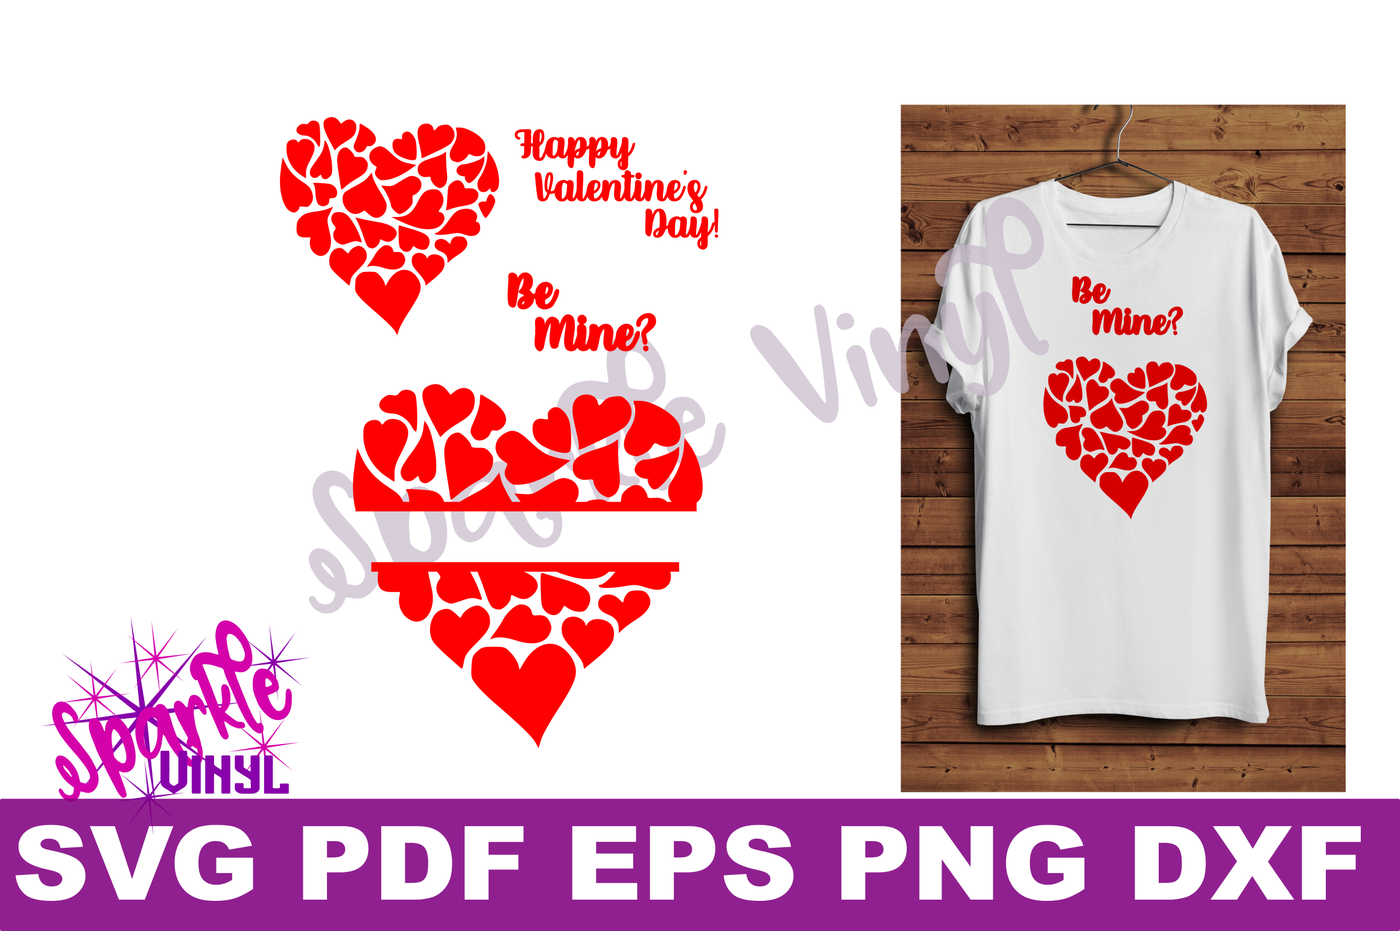 Svg Valentine Toddler Girl Kids Shirt Outfit Valentine Svg Designs Printable Or Cut File For Cricut Or Silhouette Dxf Eps Png Pdf By Sparkle Vinyl Designs Thehungryjpeg Com